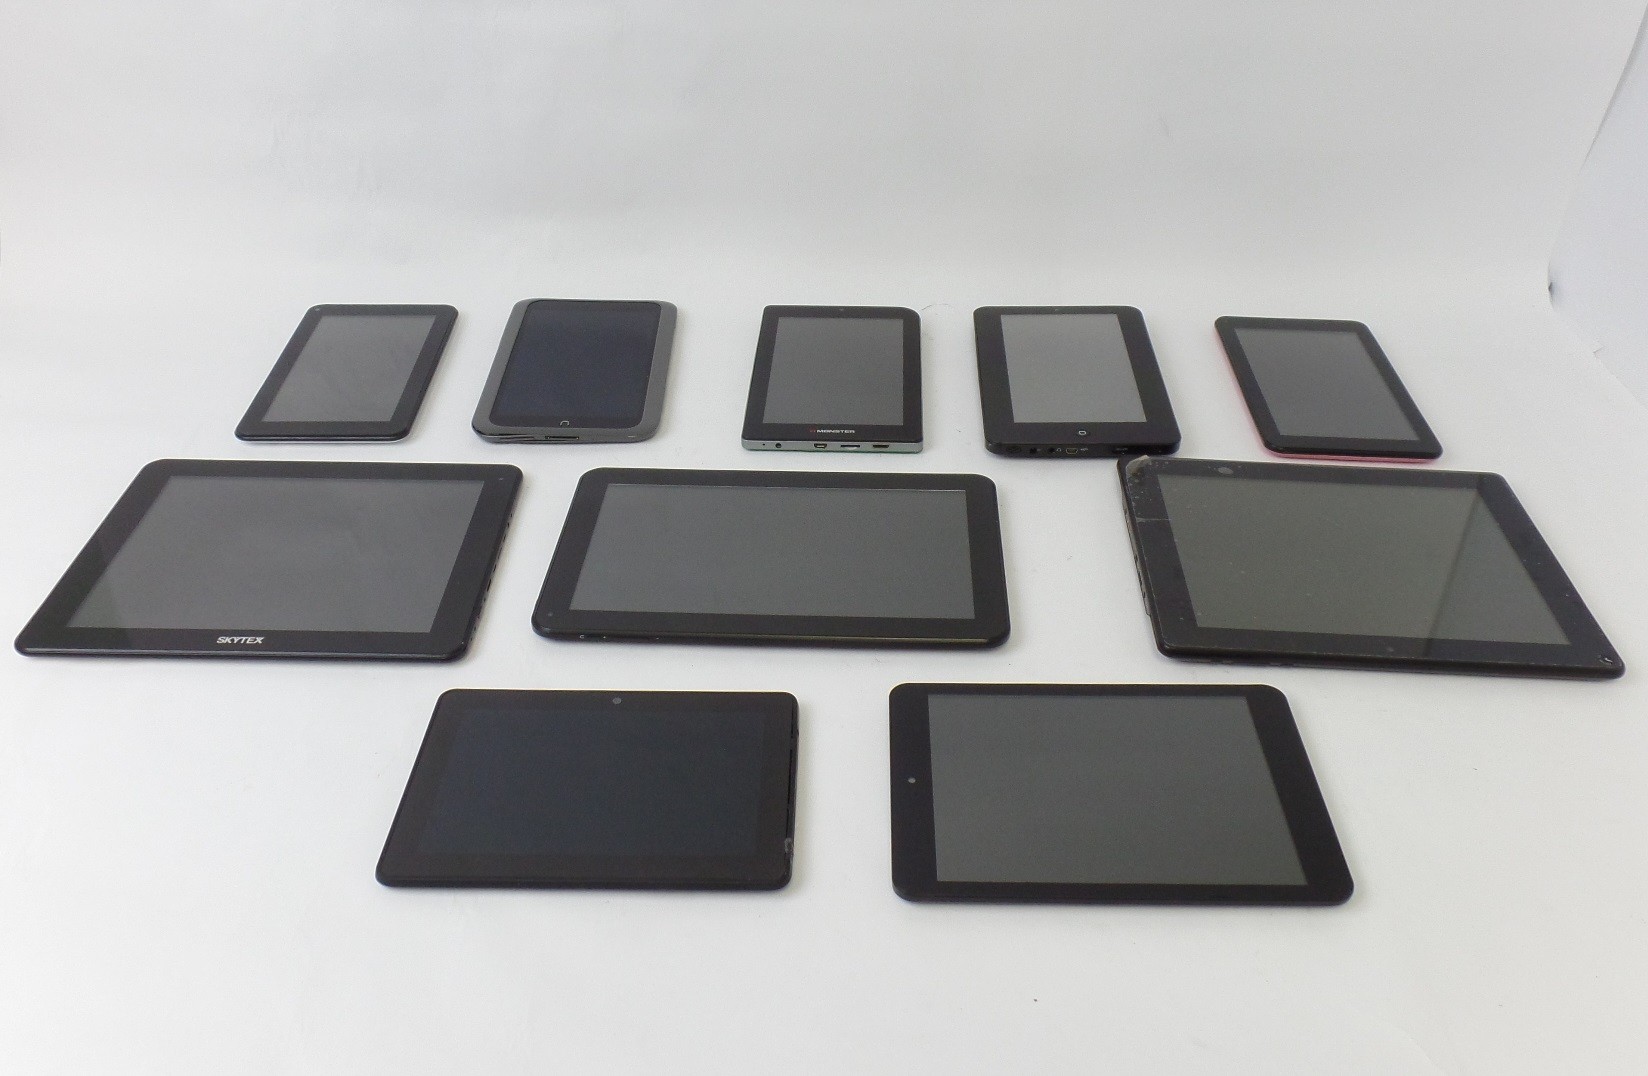 Lot of 75 Tablets Samsung Acer Surface Coby Ematic Pioneer Nook AS IS